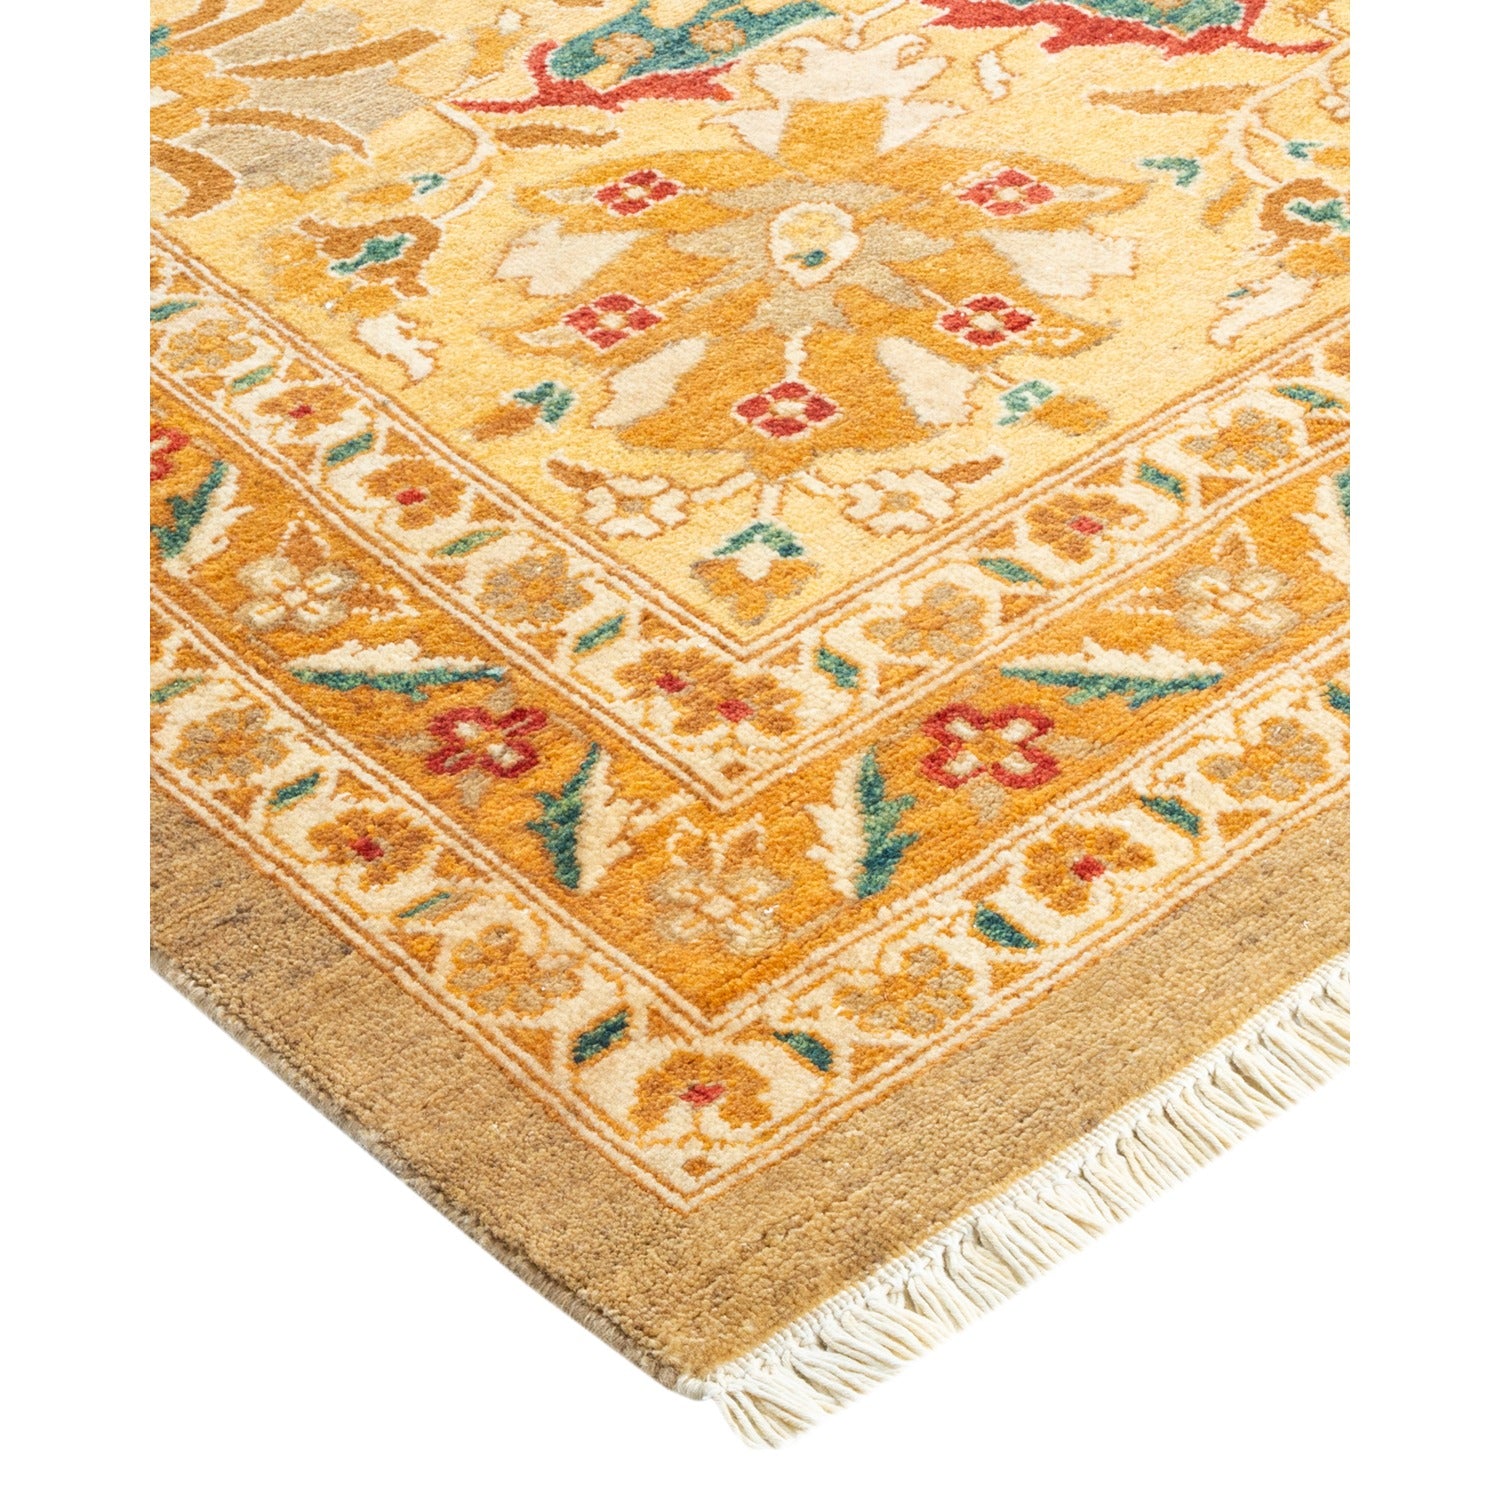 Intricate, colorful rug with floral and geometric designs and fringe.